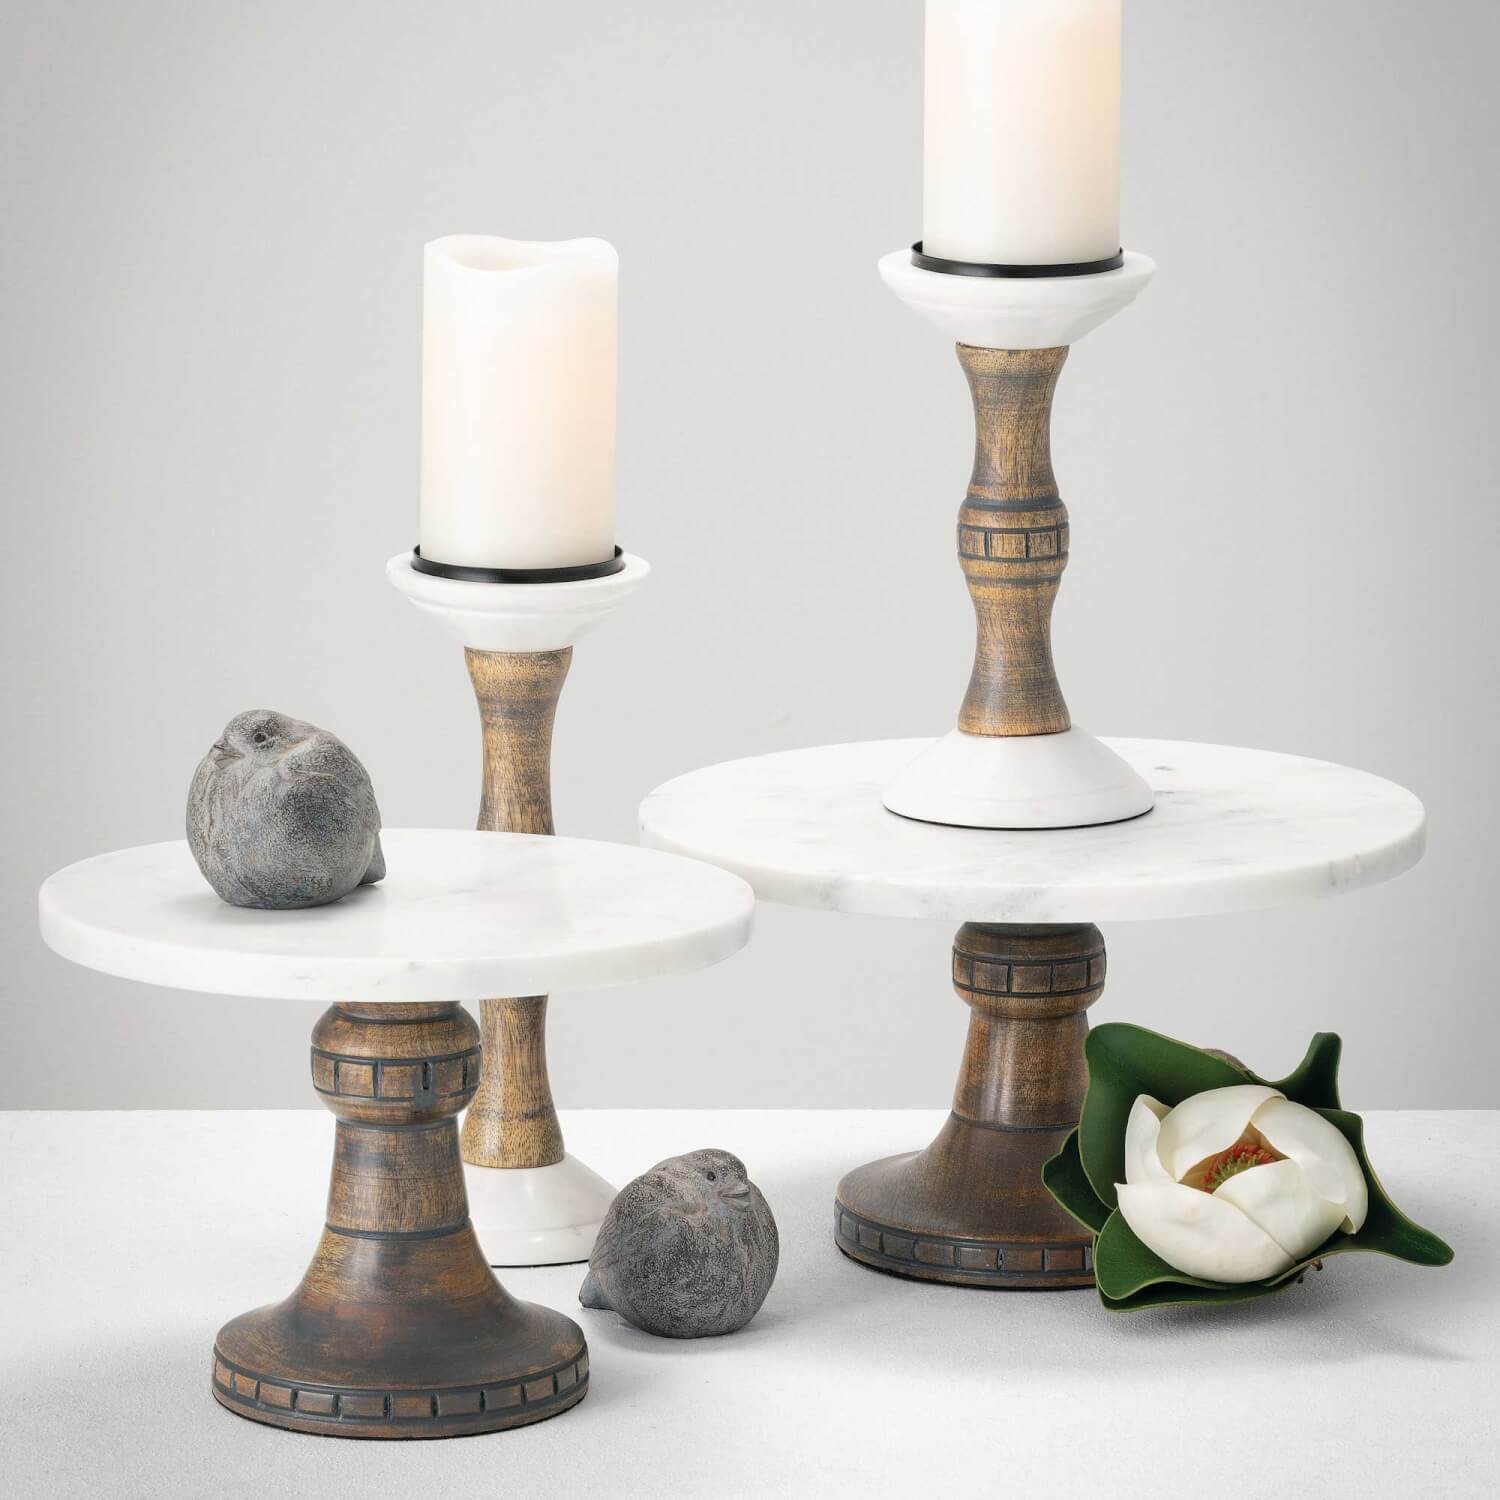 2 marble-topped pedestals with wooden bases styled with bird decor, faux flowers, and candles on similiar candle pedestals.